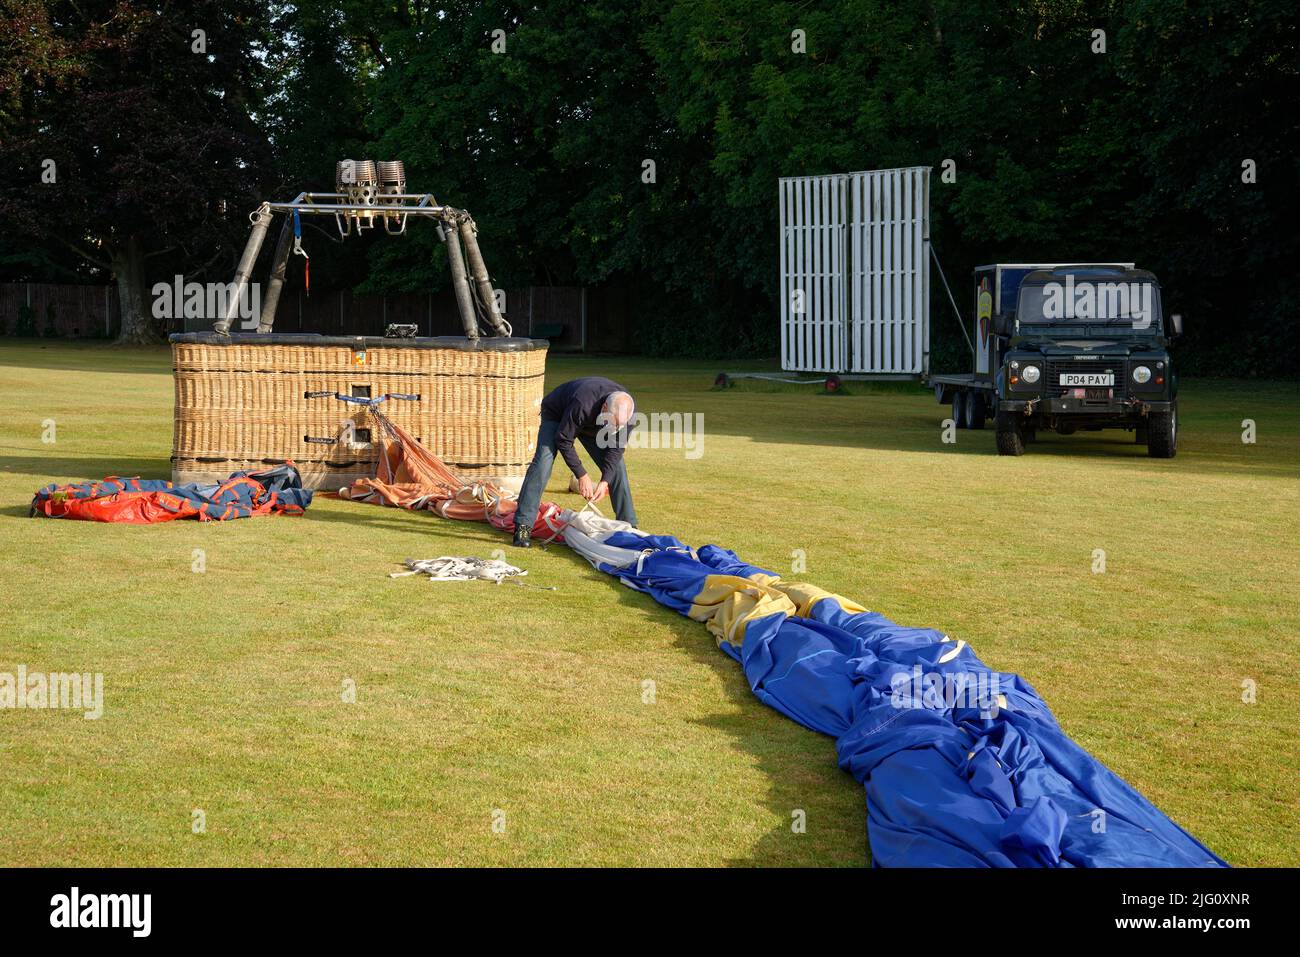 A hot air balloon. Putting the balloon away after landing near a cricket pitch. The gondola (basket) and the folded envelope (balloon fabric). Stock Photo